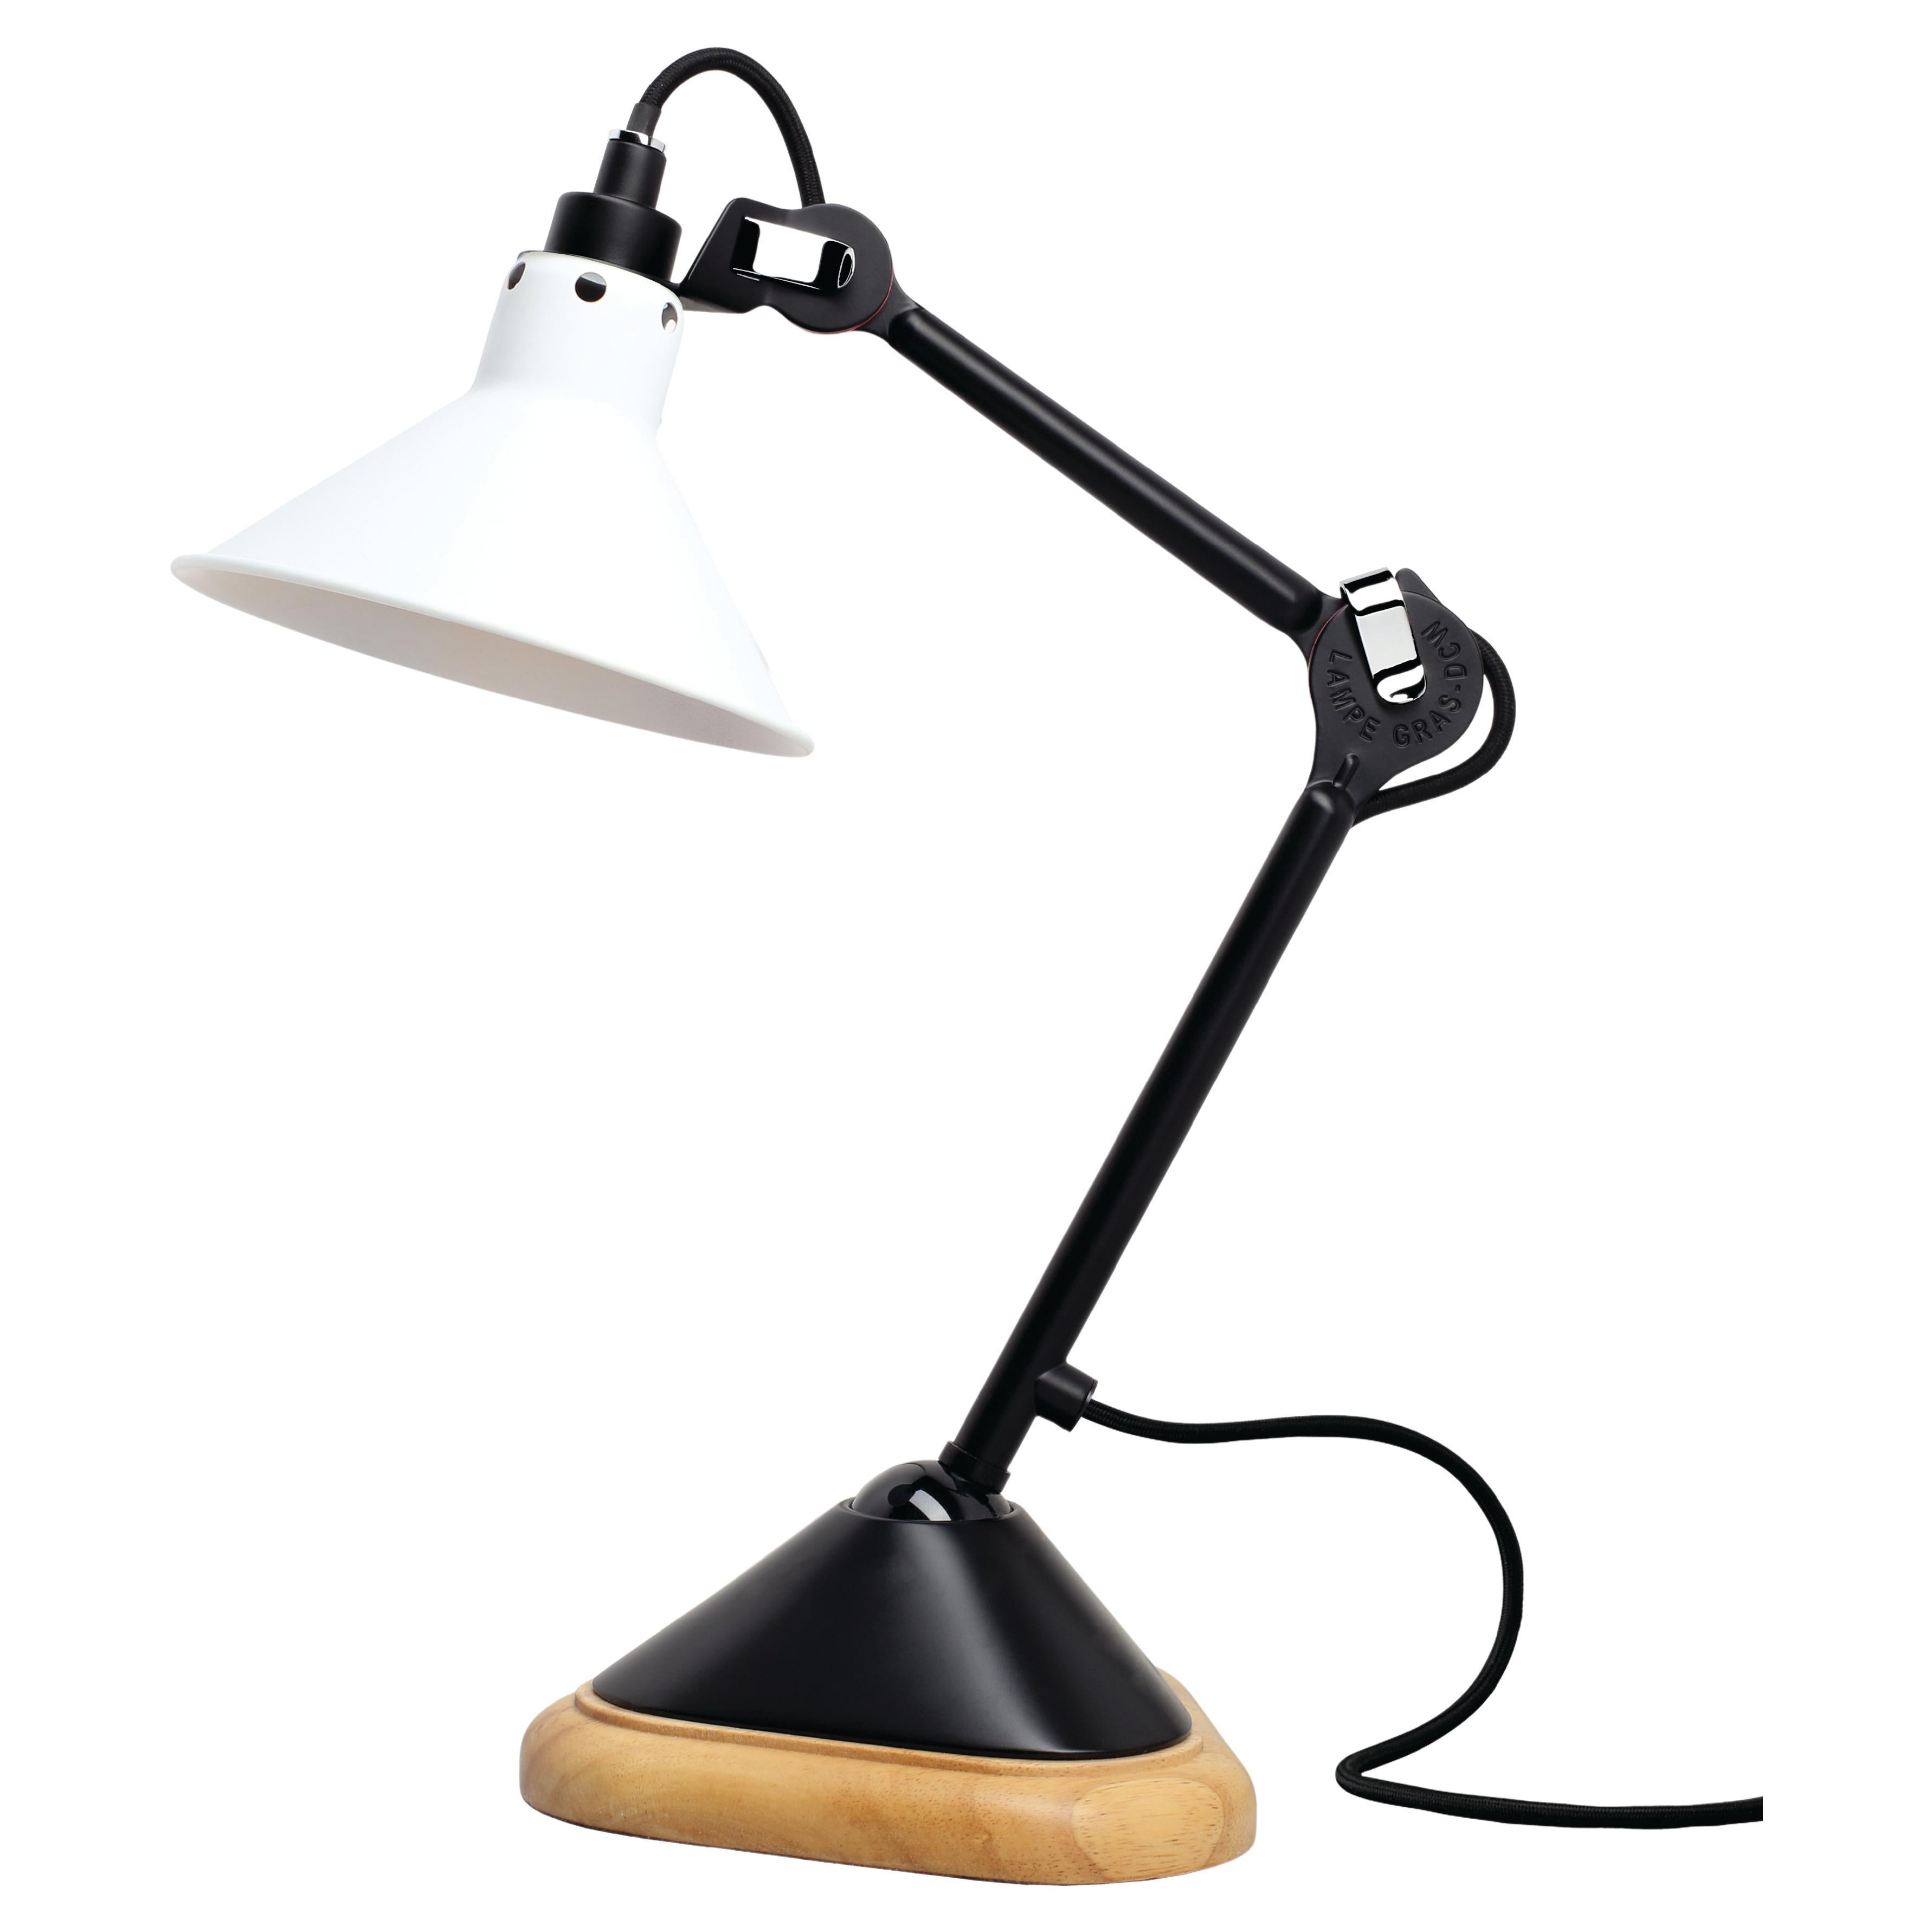 DCW Editions La Lampe Gras N°207 Conic Table Lamp in Black Arm with White Shade